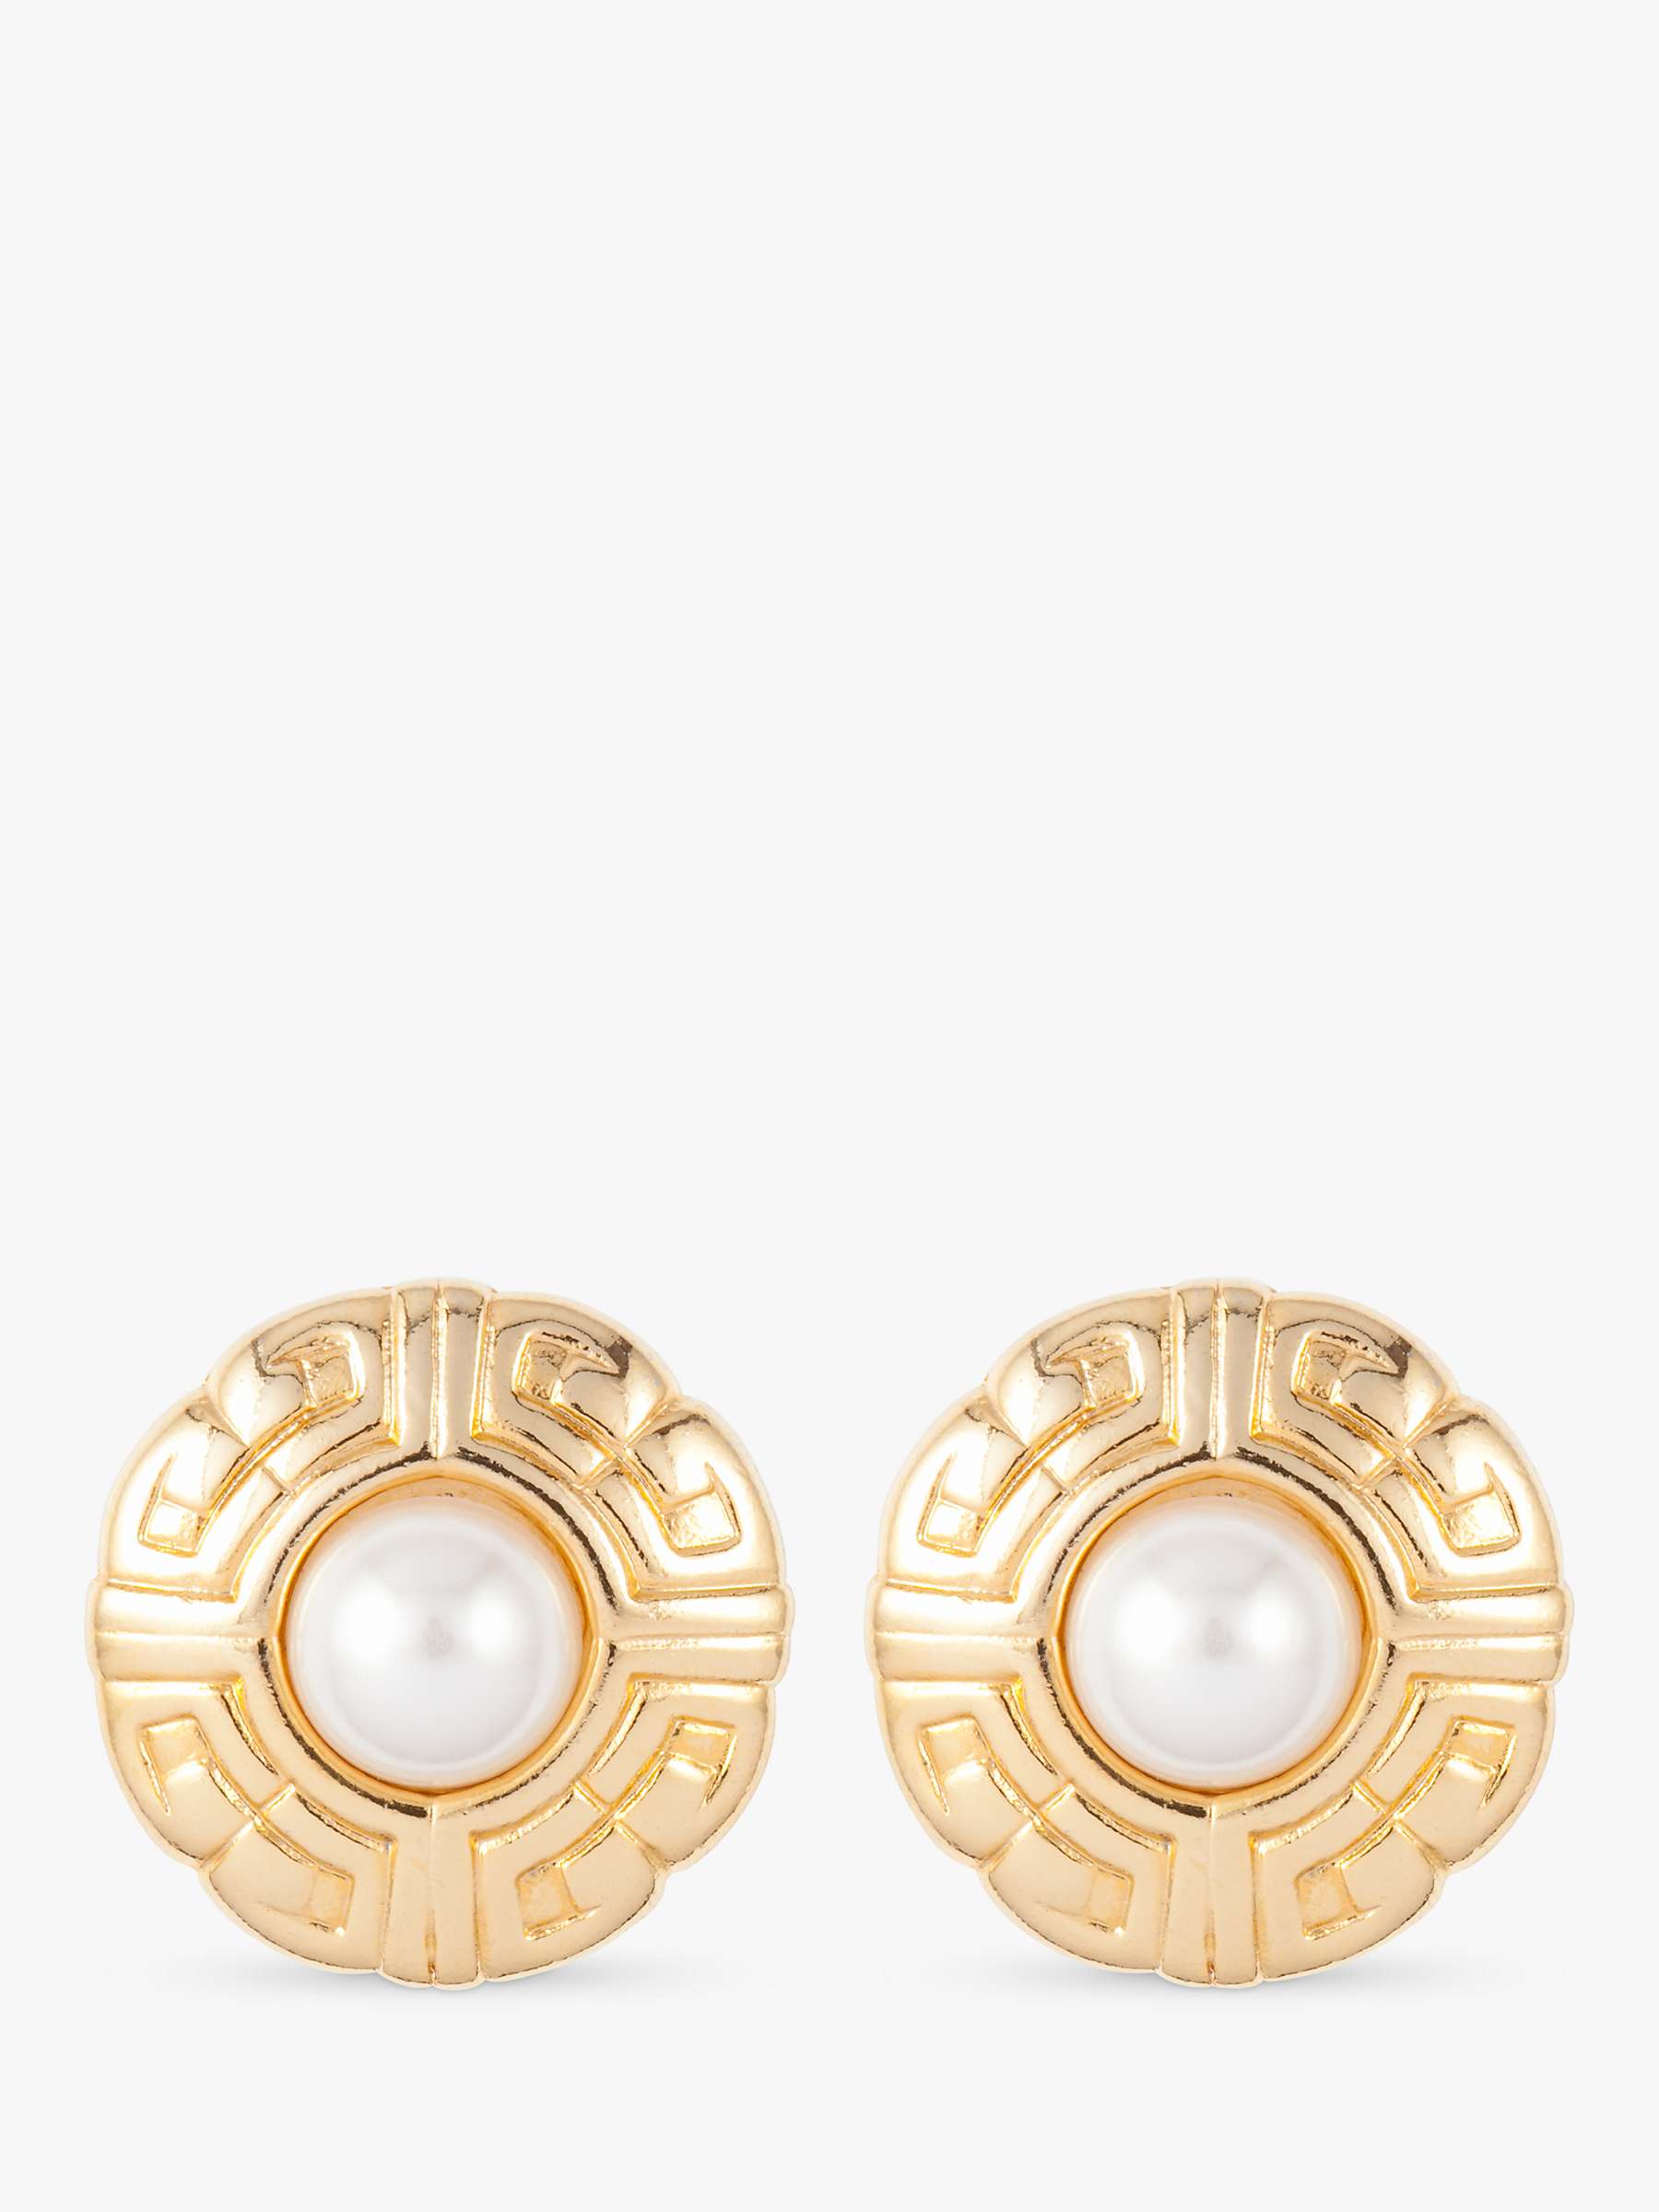 Buy Susan Caplan Vintage Givenchy Faux Pearl Clip-On Earrings Online at johnlewis.com